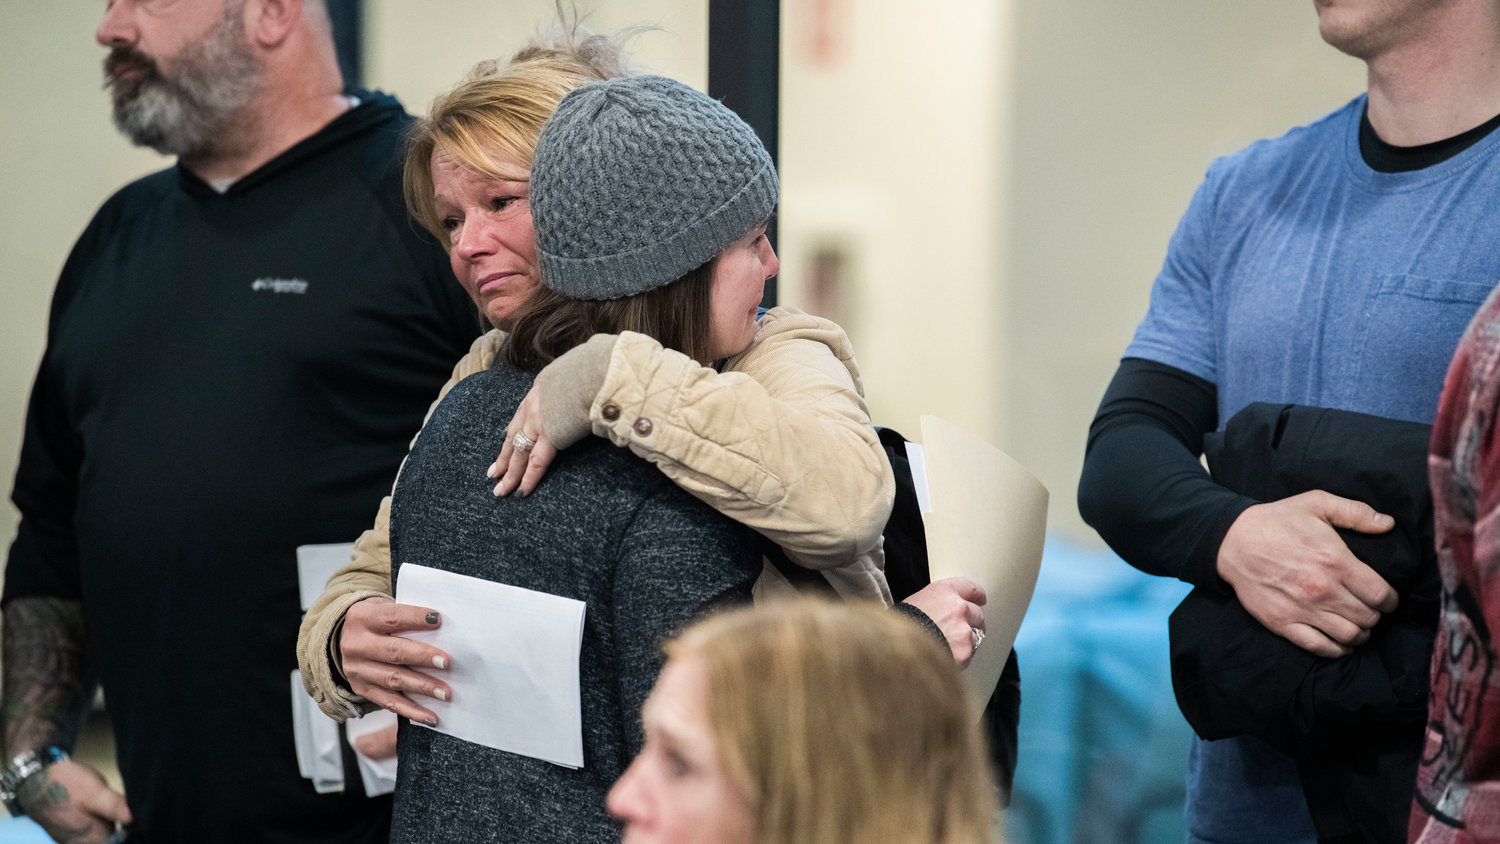 Jennifer Wiens receives an embrace after speaking out against a Supreme Living facility on property she once owned in Tenino.